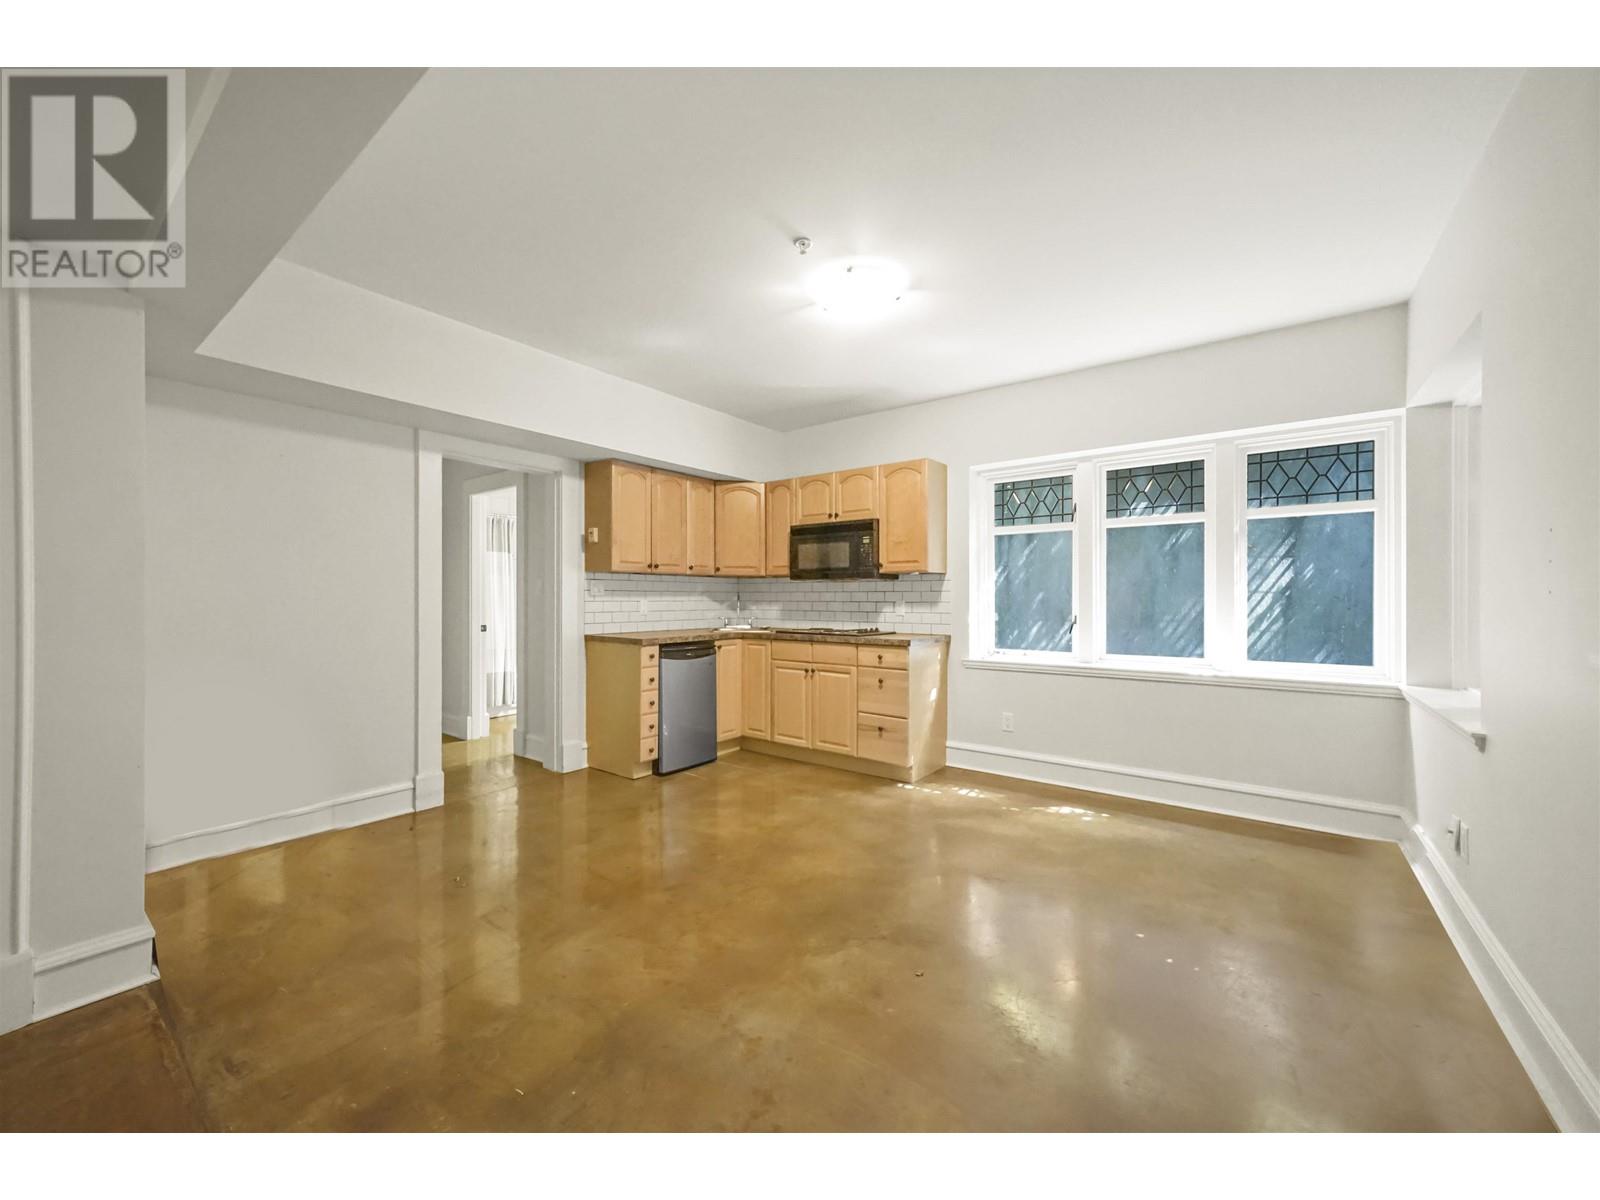 Listing Picture 23 of 40 : 1637 ANGUS DRIVE, Vancouver / 溫哥華 - 魯藝地產 Yvonne Lu Group - MLS Medallion Club Member